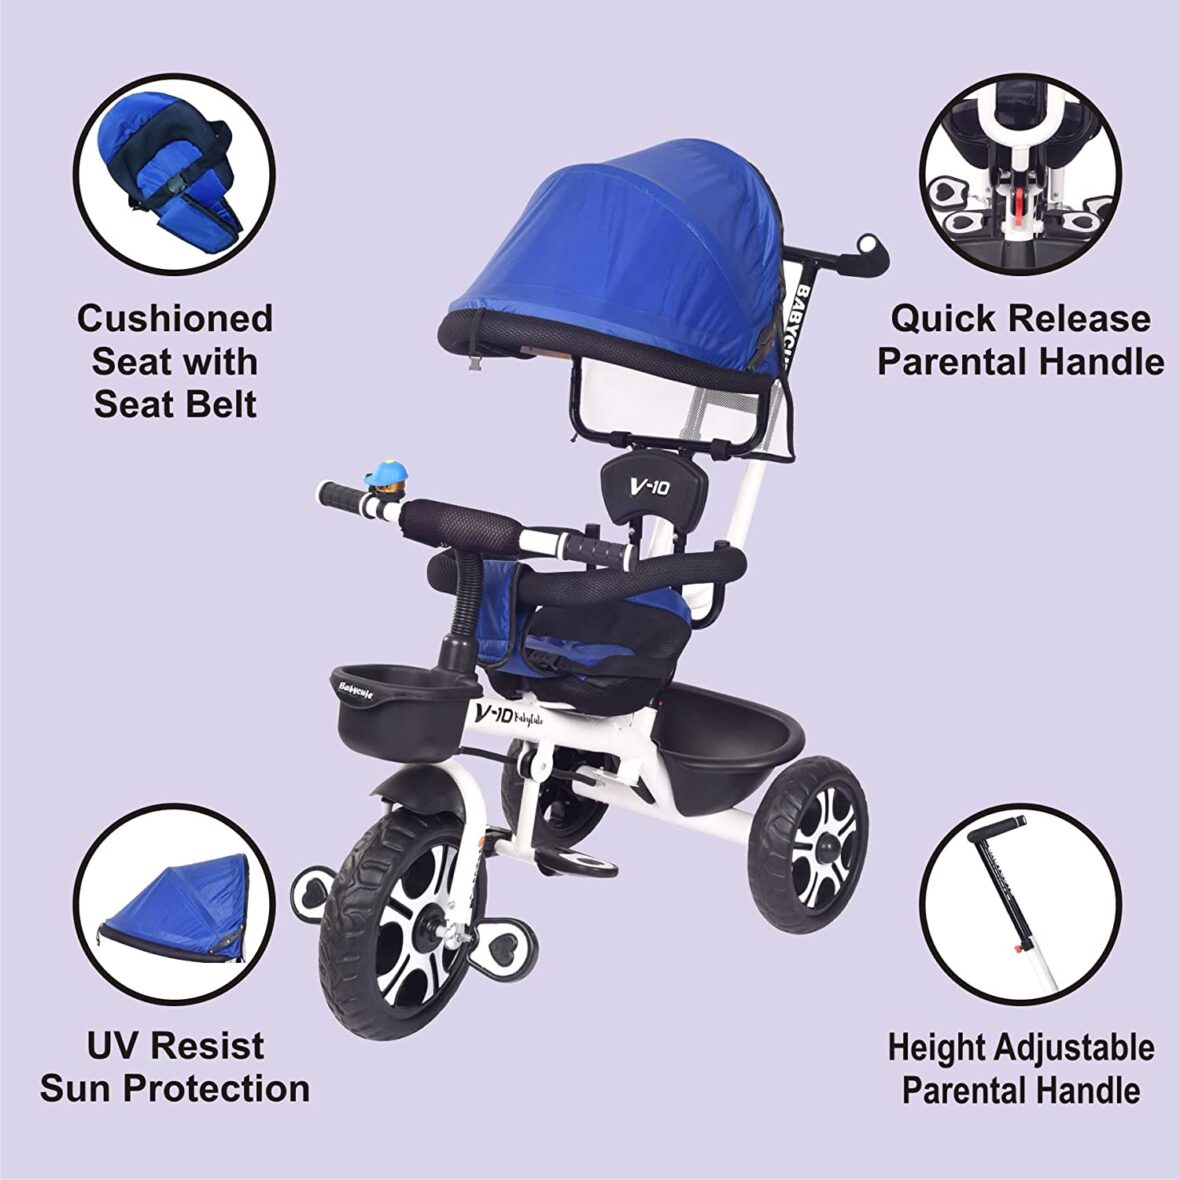 BabyCute v10 Tricycle For Kids with Canopy and Parental Control by U smile Baby World